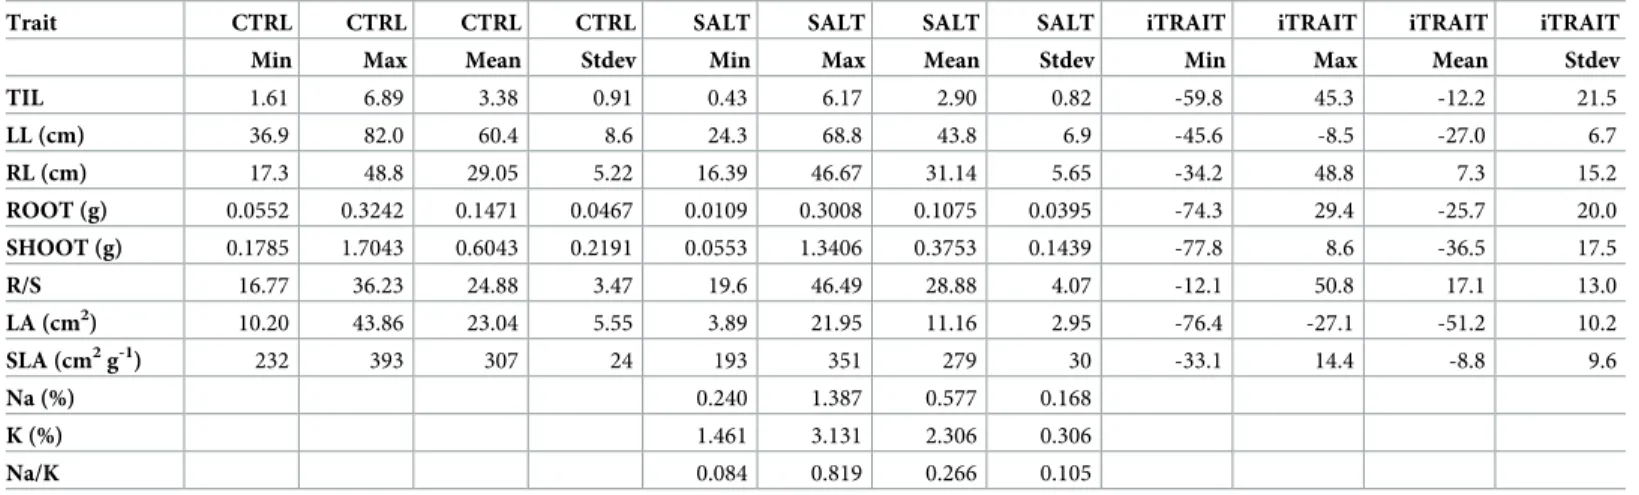 Table 3. Statistical parameters for all traits in the control (CTRL) and salinity (SALT) treatments and for the indices of stress response.